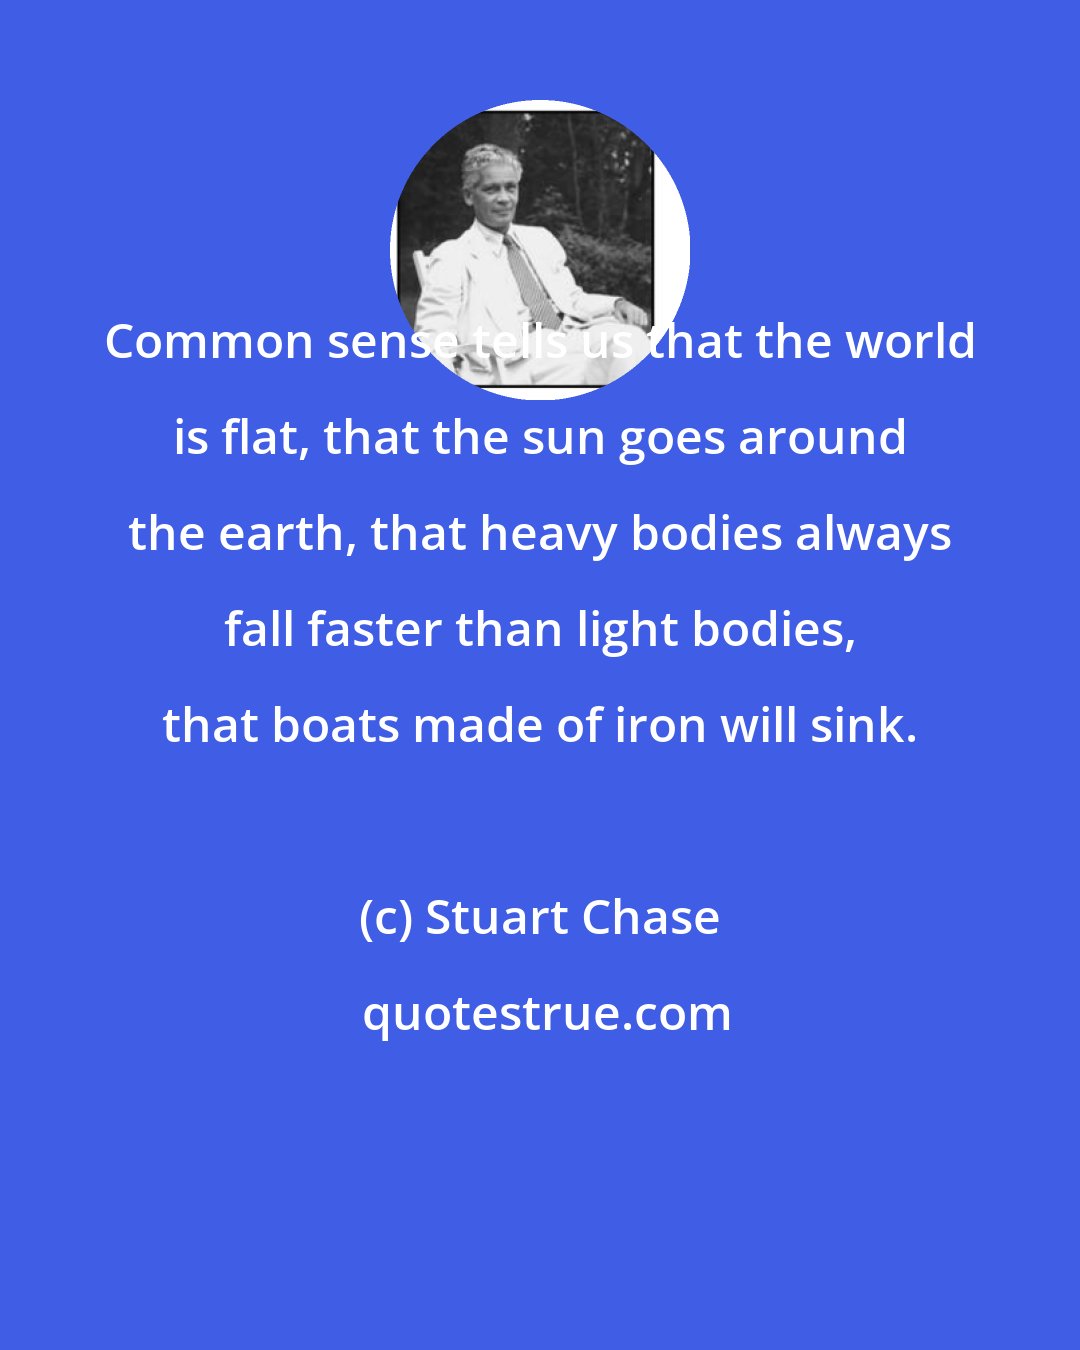 Stuart Chase: Common sense tells us that the world is flat, that the sun goes around the earth, that heavy bodies always fall faster than light bodies, that boats made of iron will sink.